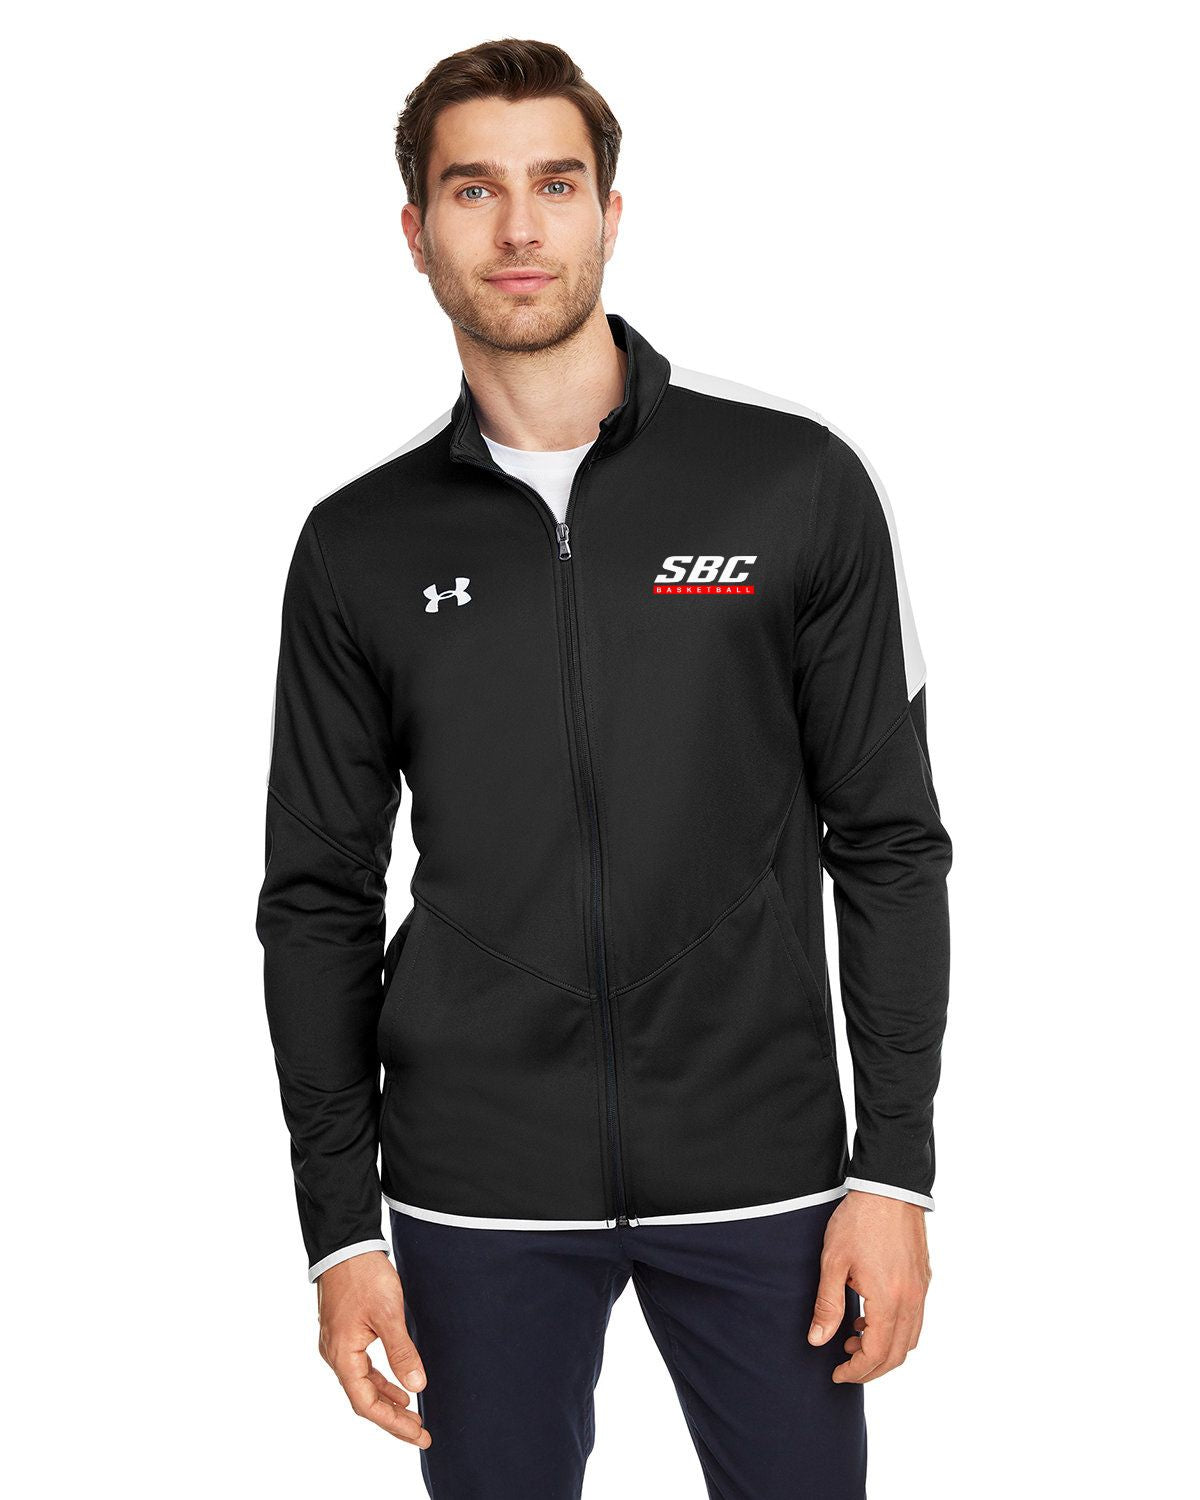 Southern Boone Basketball Under Armour Men's Rival Knit Jacket - 1326761